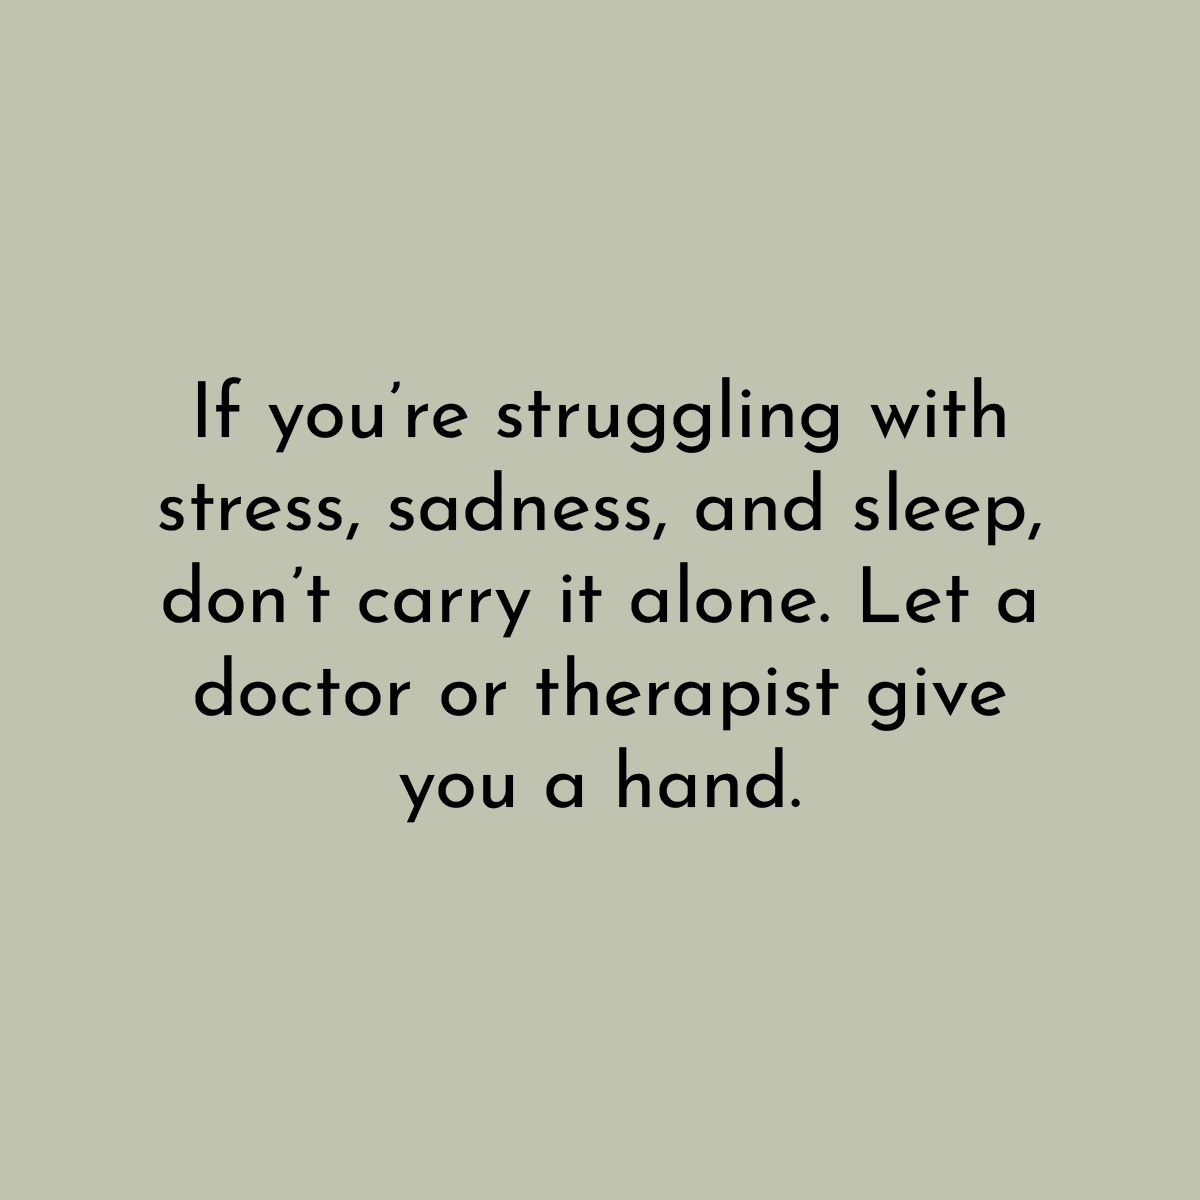 If you're struggling with stress, sadness, and sleep, don't carry it alone. Let a doctor or therapist give you a hand.